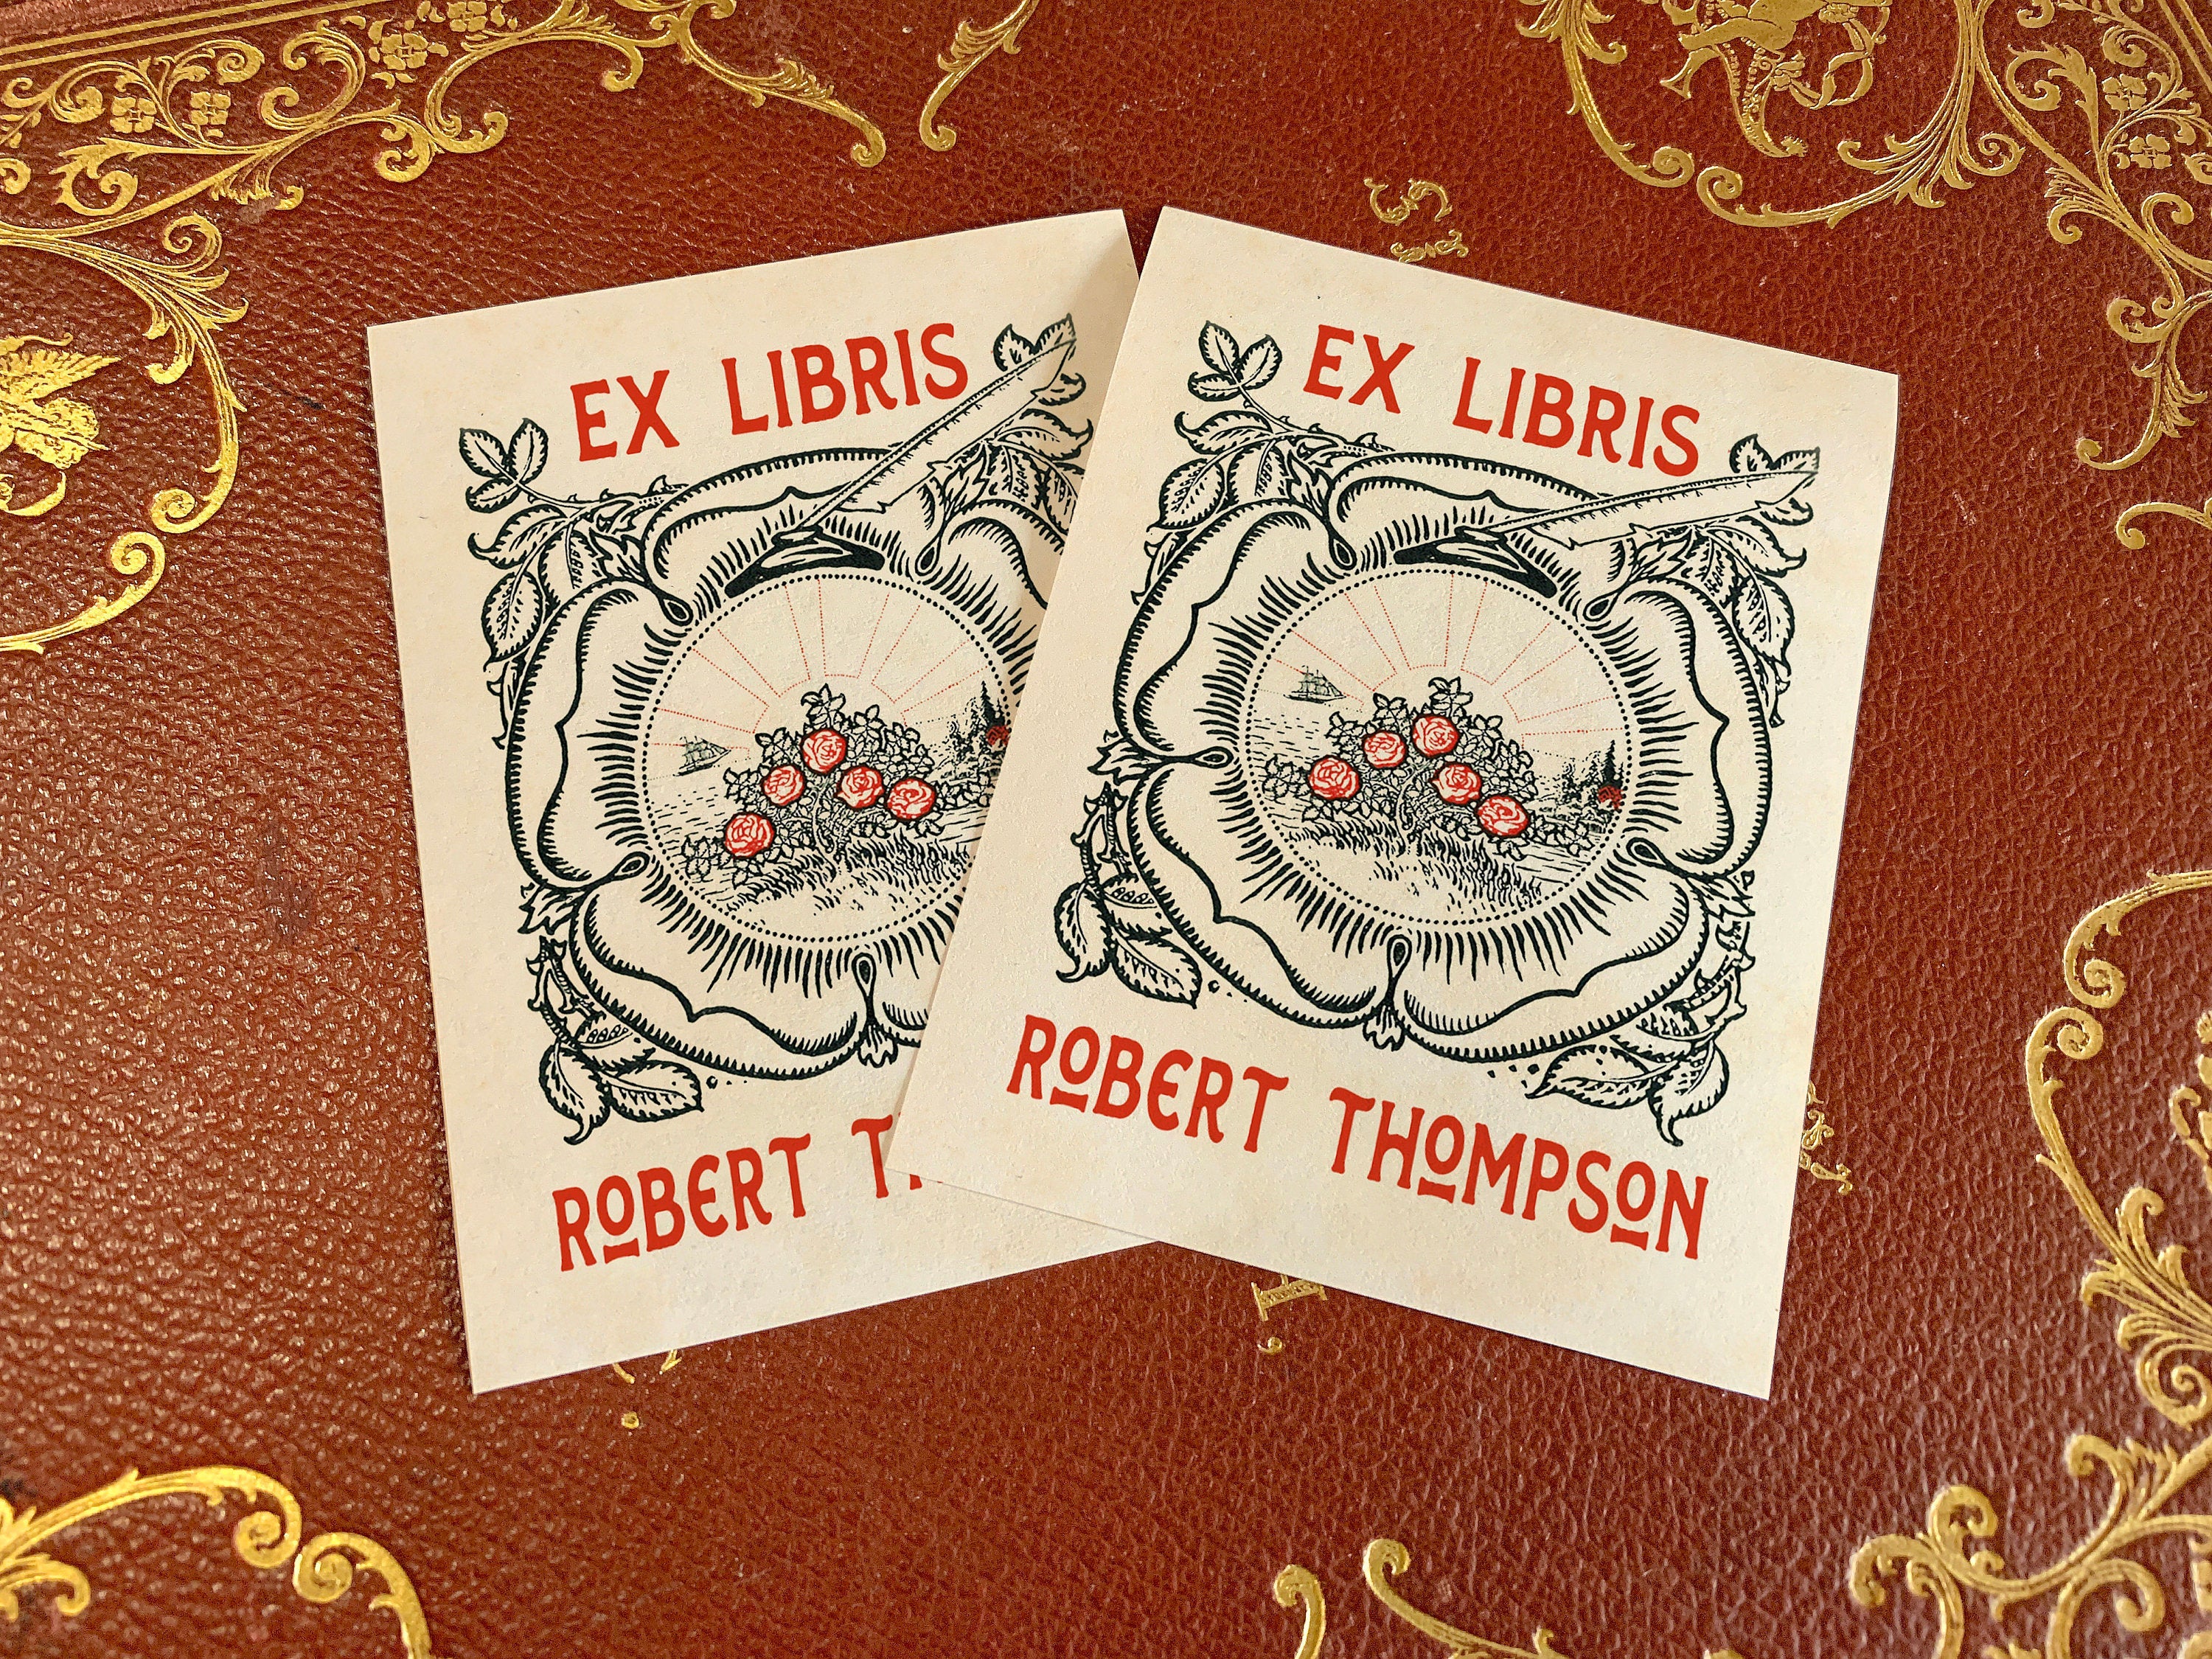 Sub Rosa, Personalized Ex-Libris Bookplates, Crafted on Traditional Gummed Paper, 3in x 4in, Set of 30